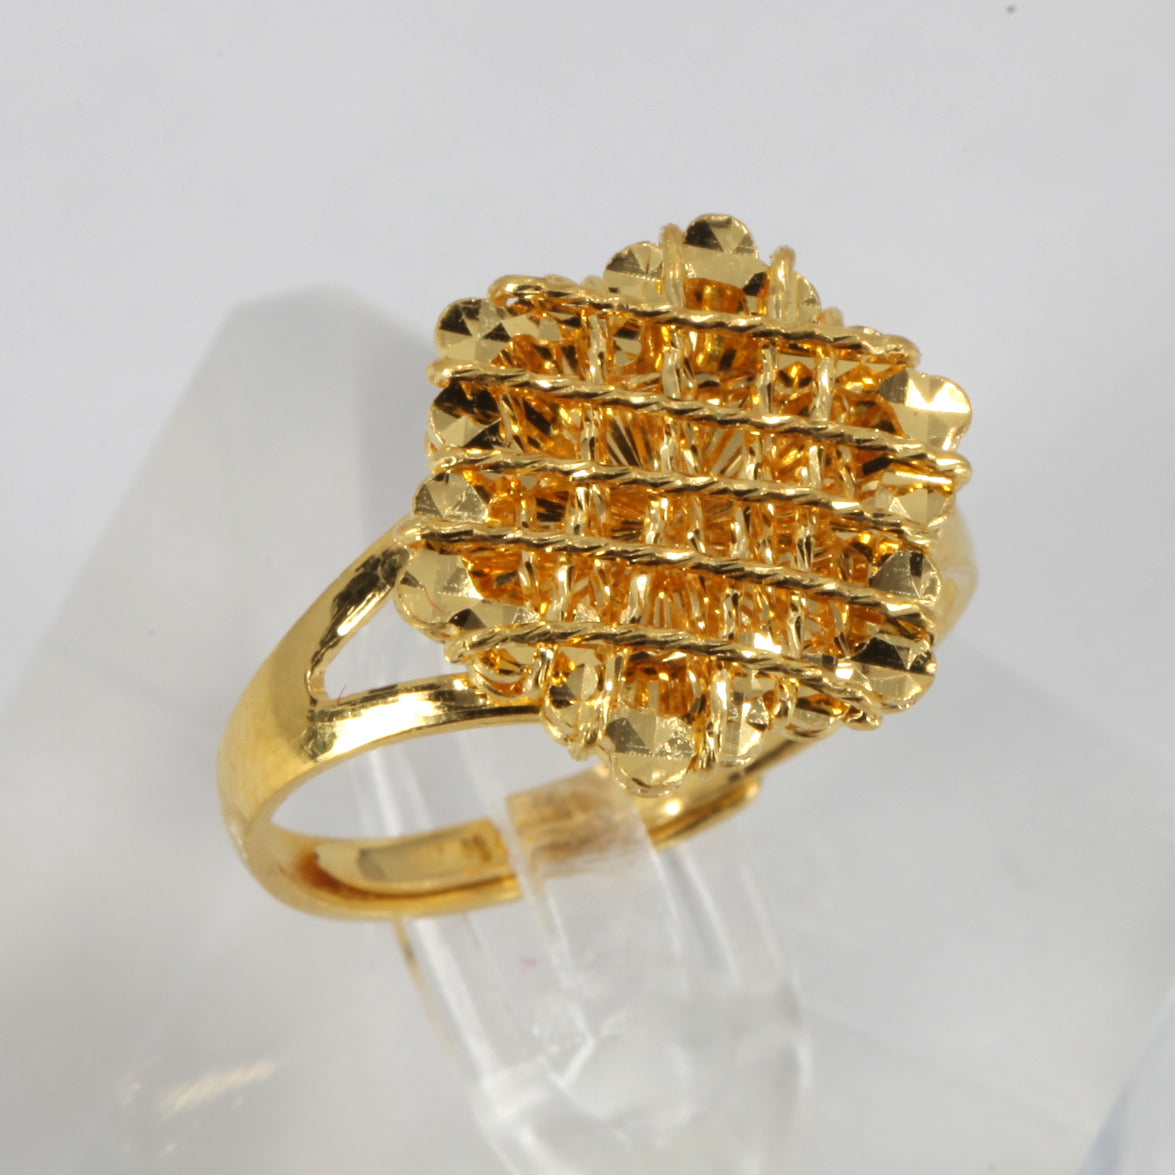 24K Solid Yellow Gold Women Design Ring Band 5.2 Grams